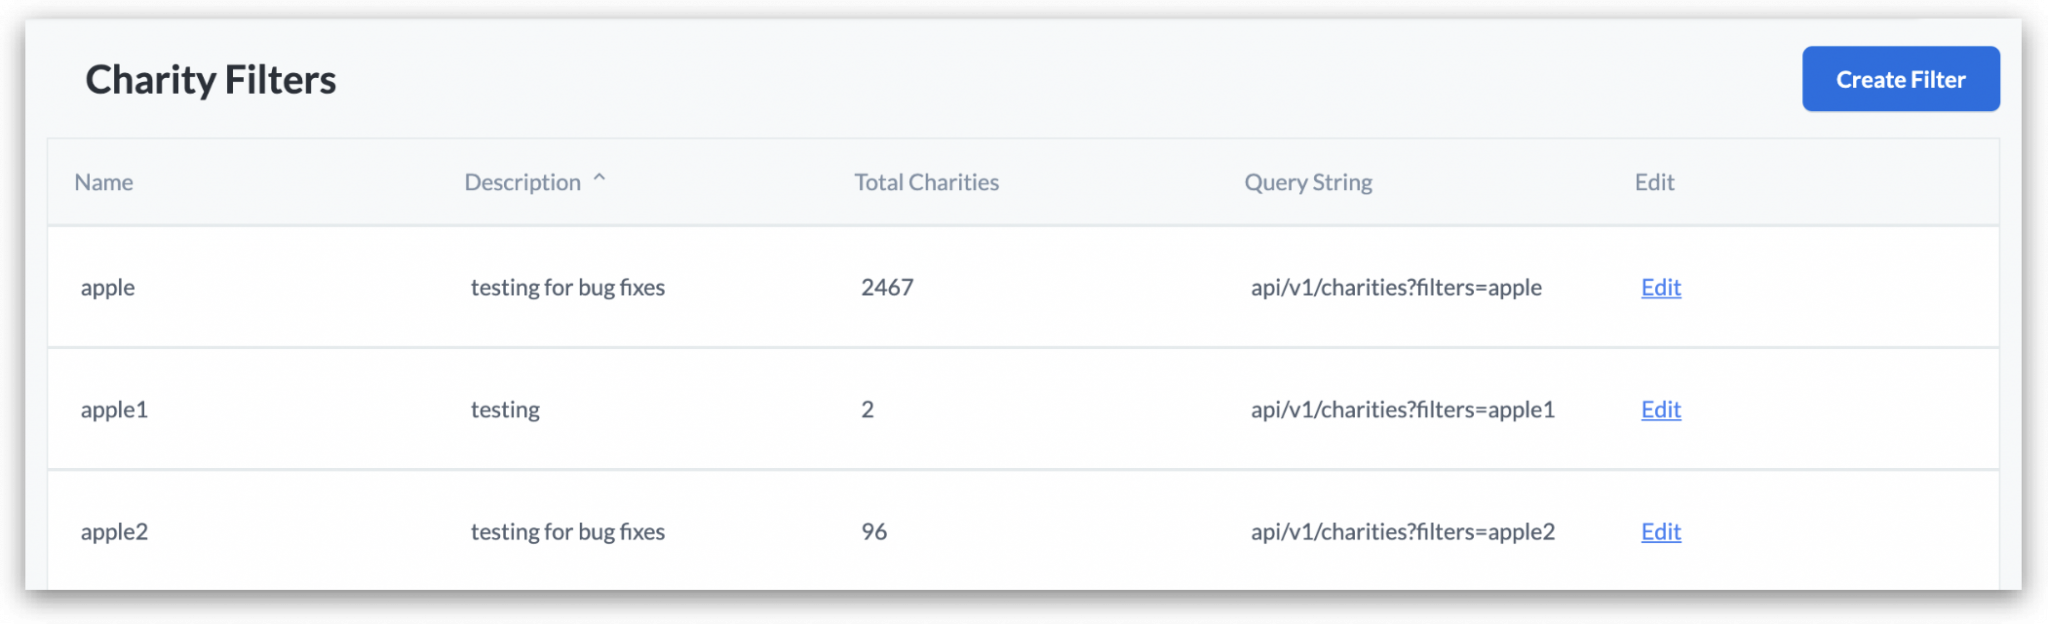 screenshot of charity filters page settings